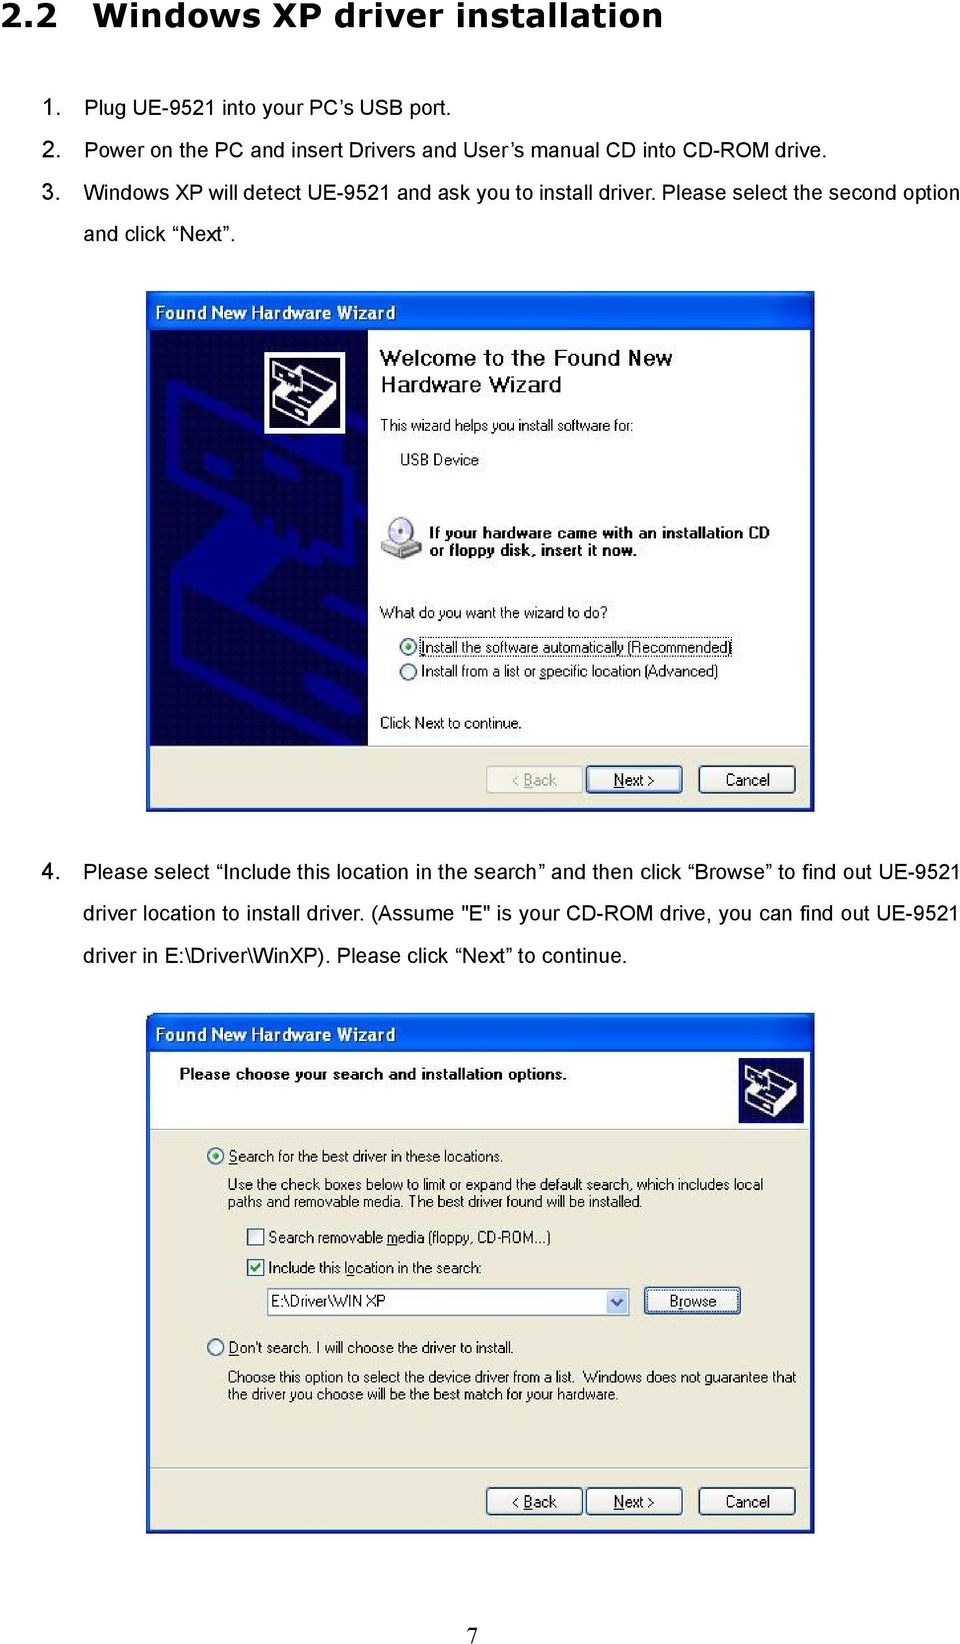 Windows XP will detect UE-9521 and ask you to install driver. Please select the second option and click Next. 4.